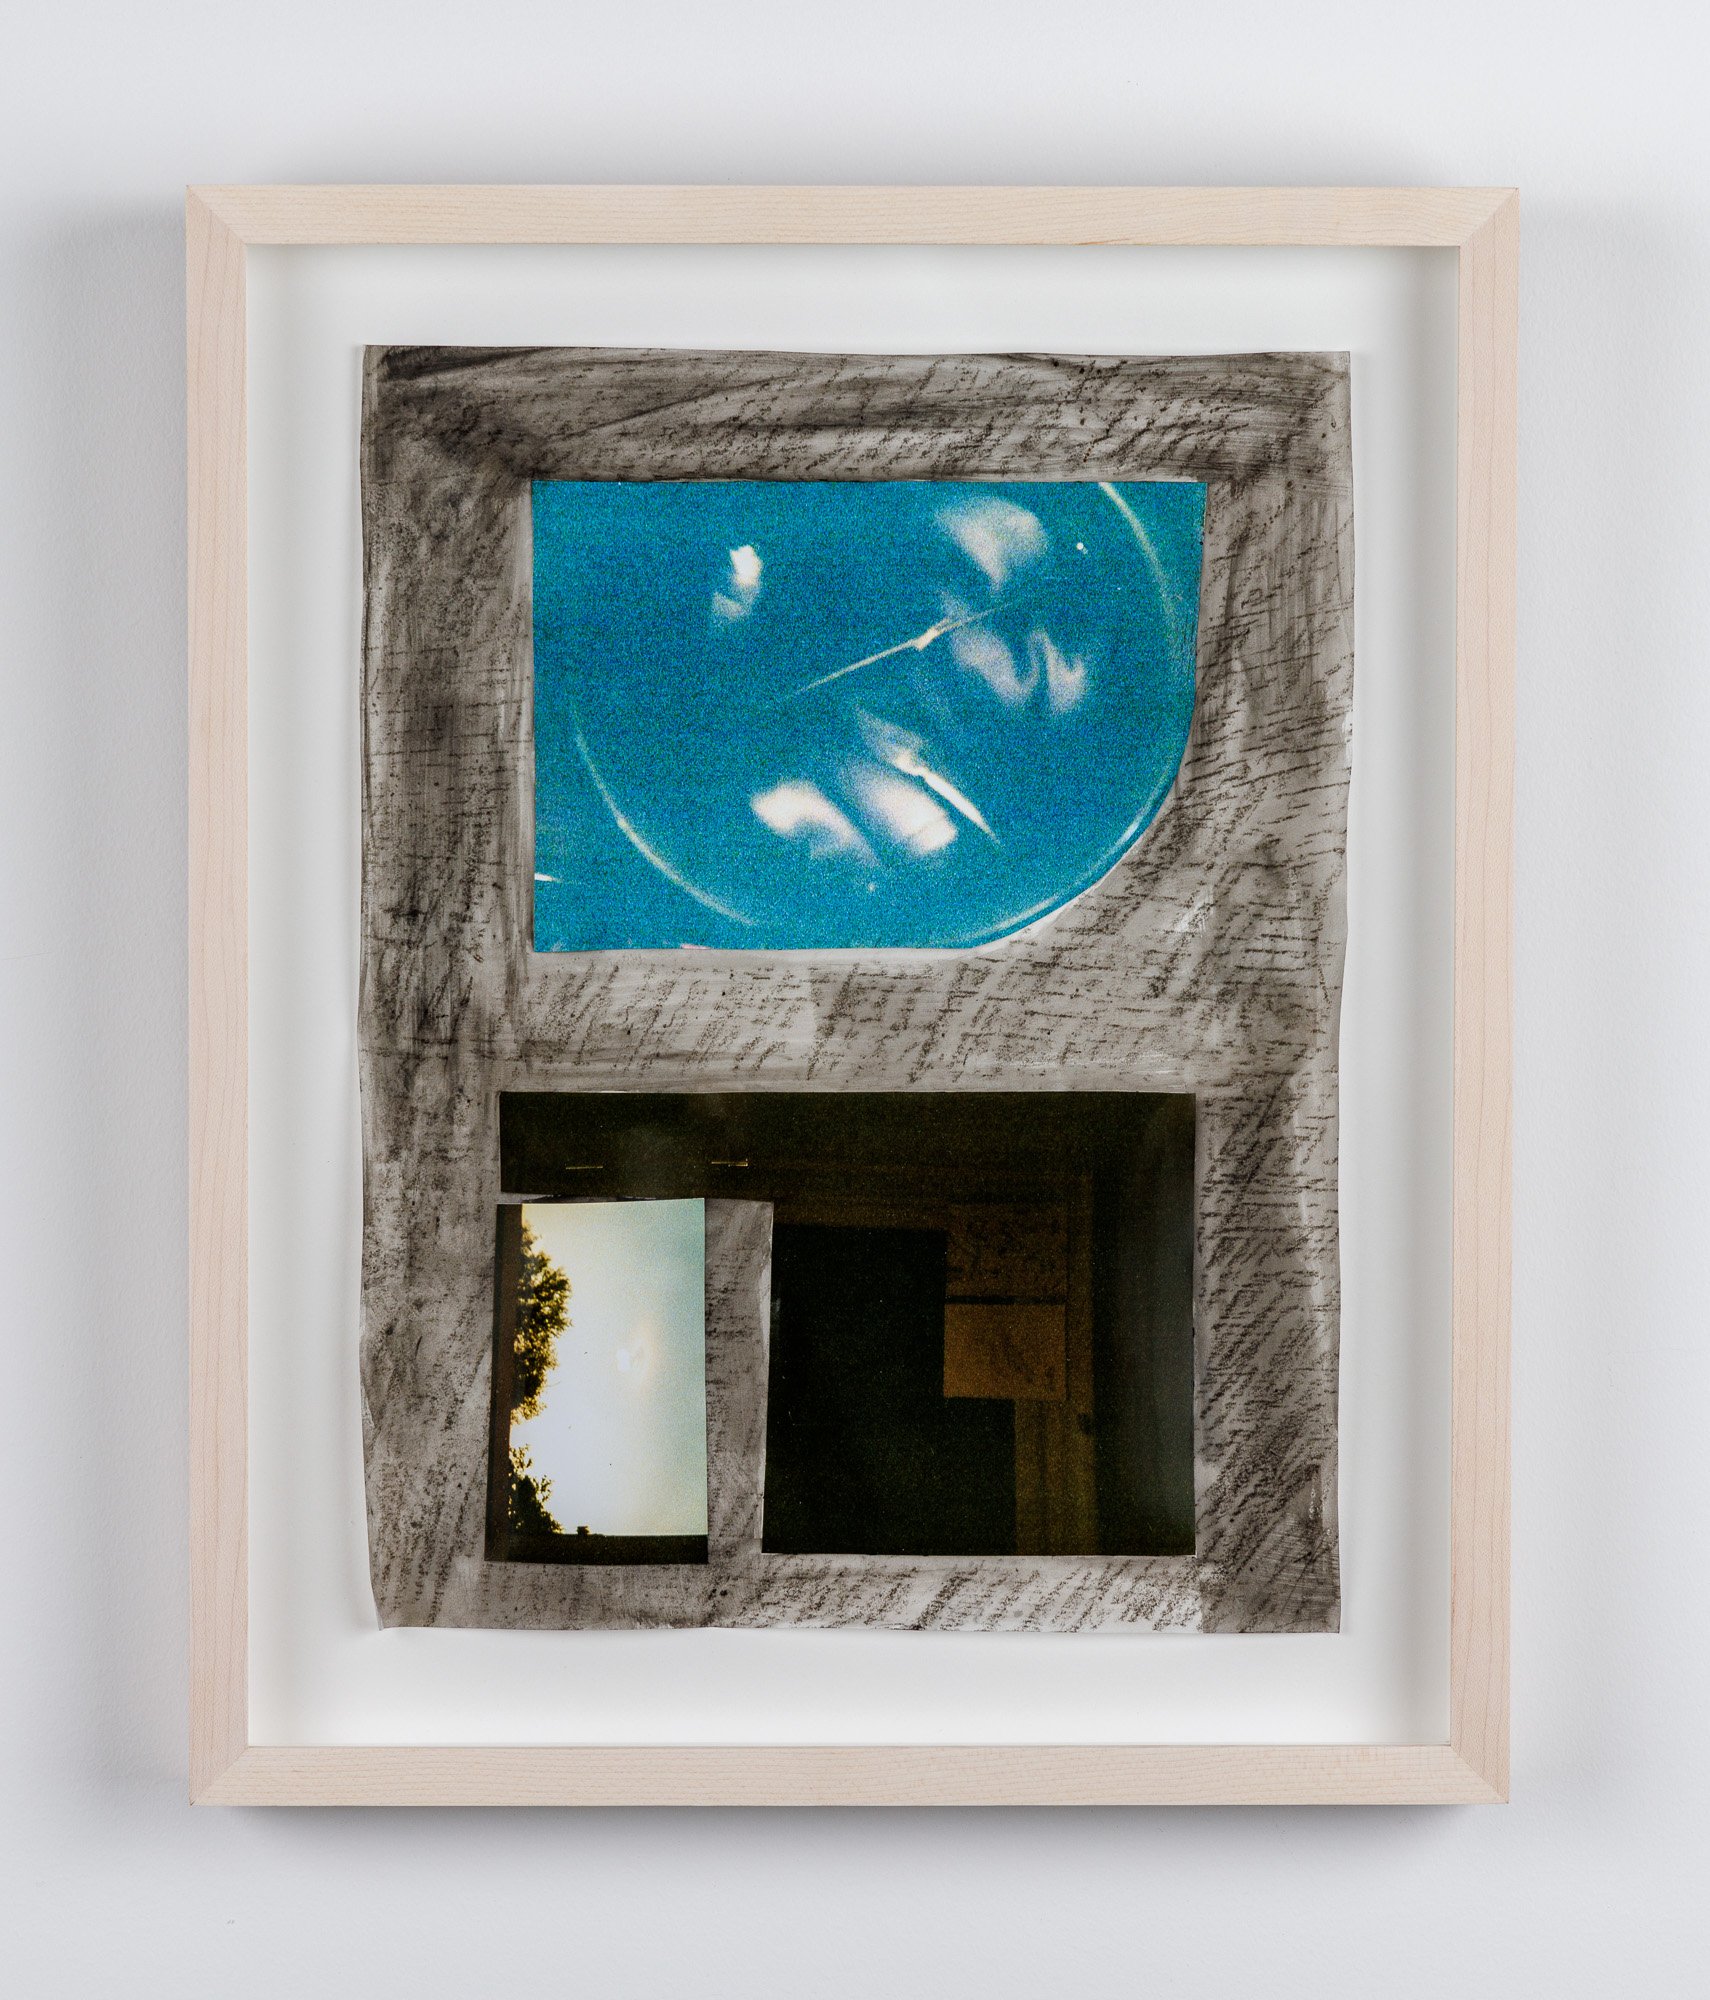  Laura Hunt,  Untitled (dyeing fabric and night window) , 2019, crayon, watercolor, and photo collage on vellum; framed, 13.75 x 11.25 inches. 